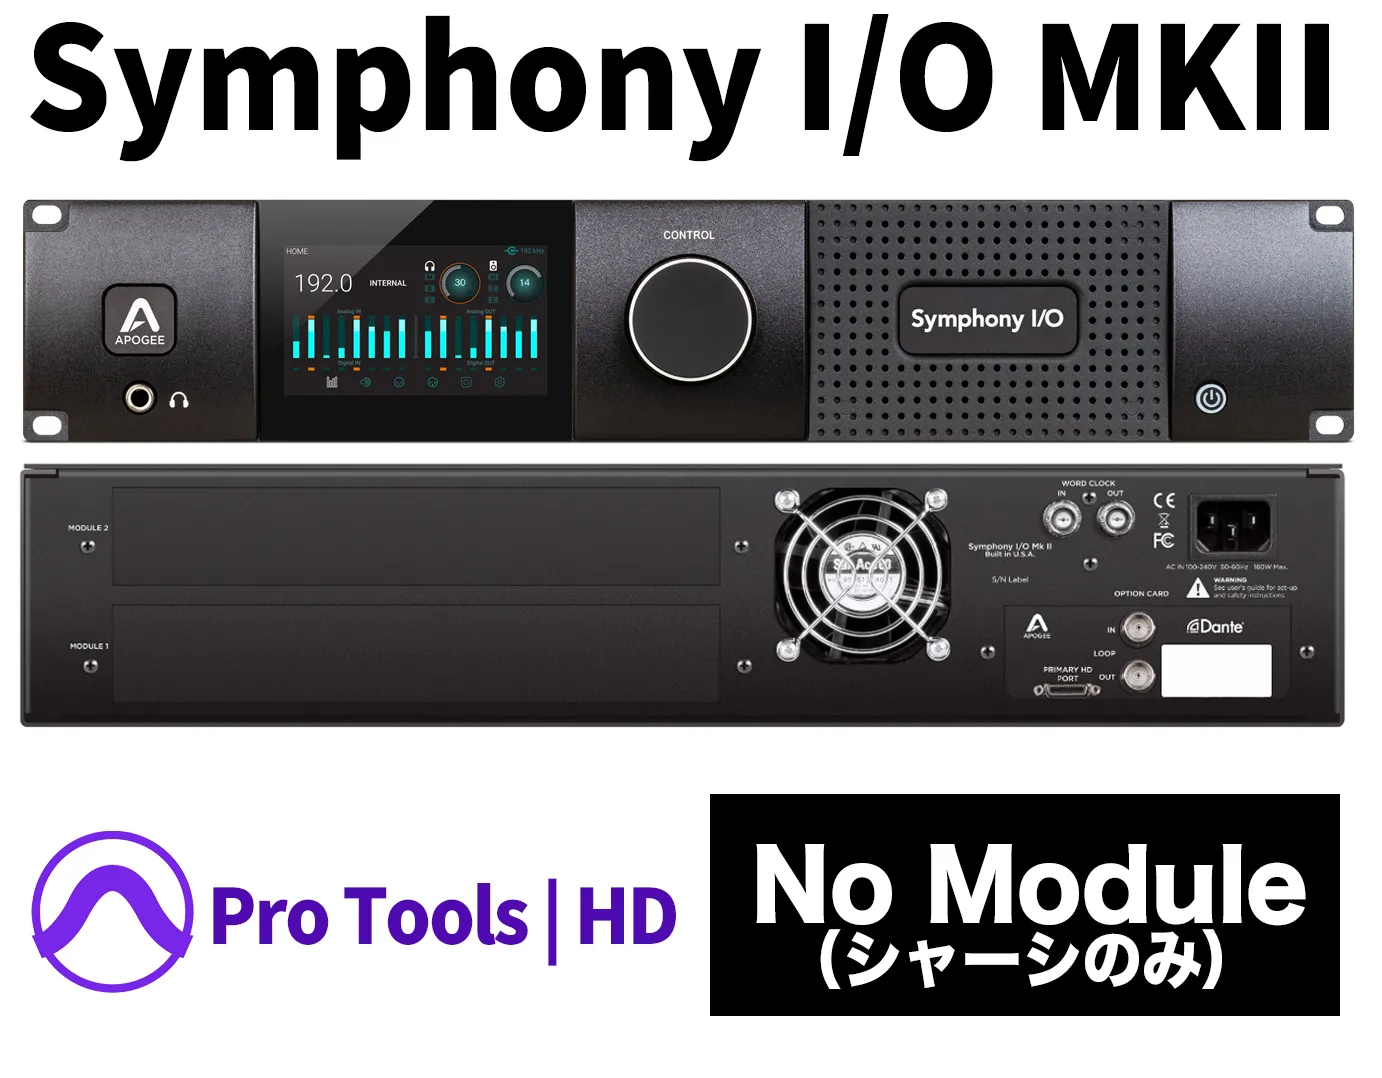 Symphony I/O MKII Pro Tools HD Chassis - No module included